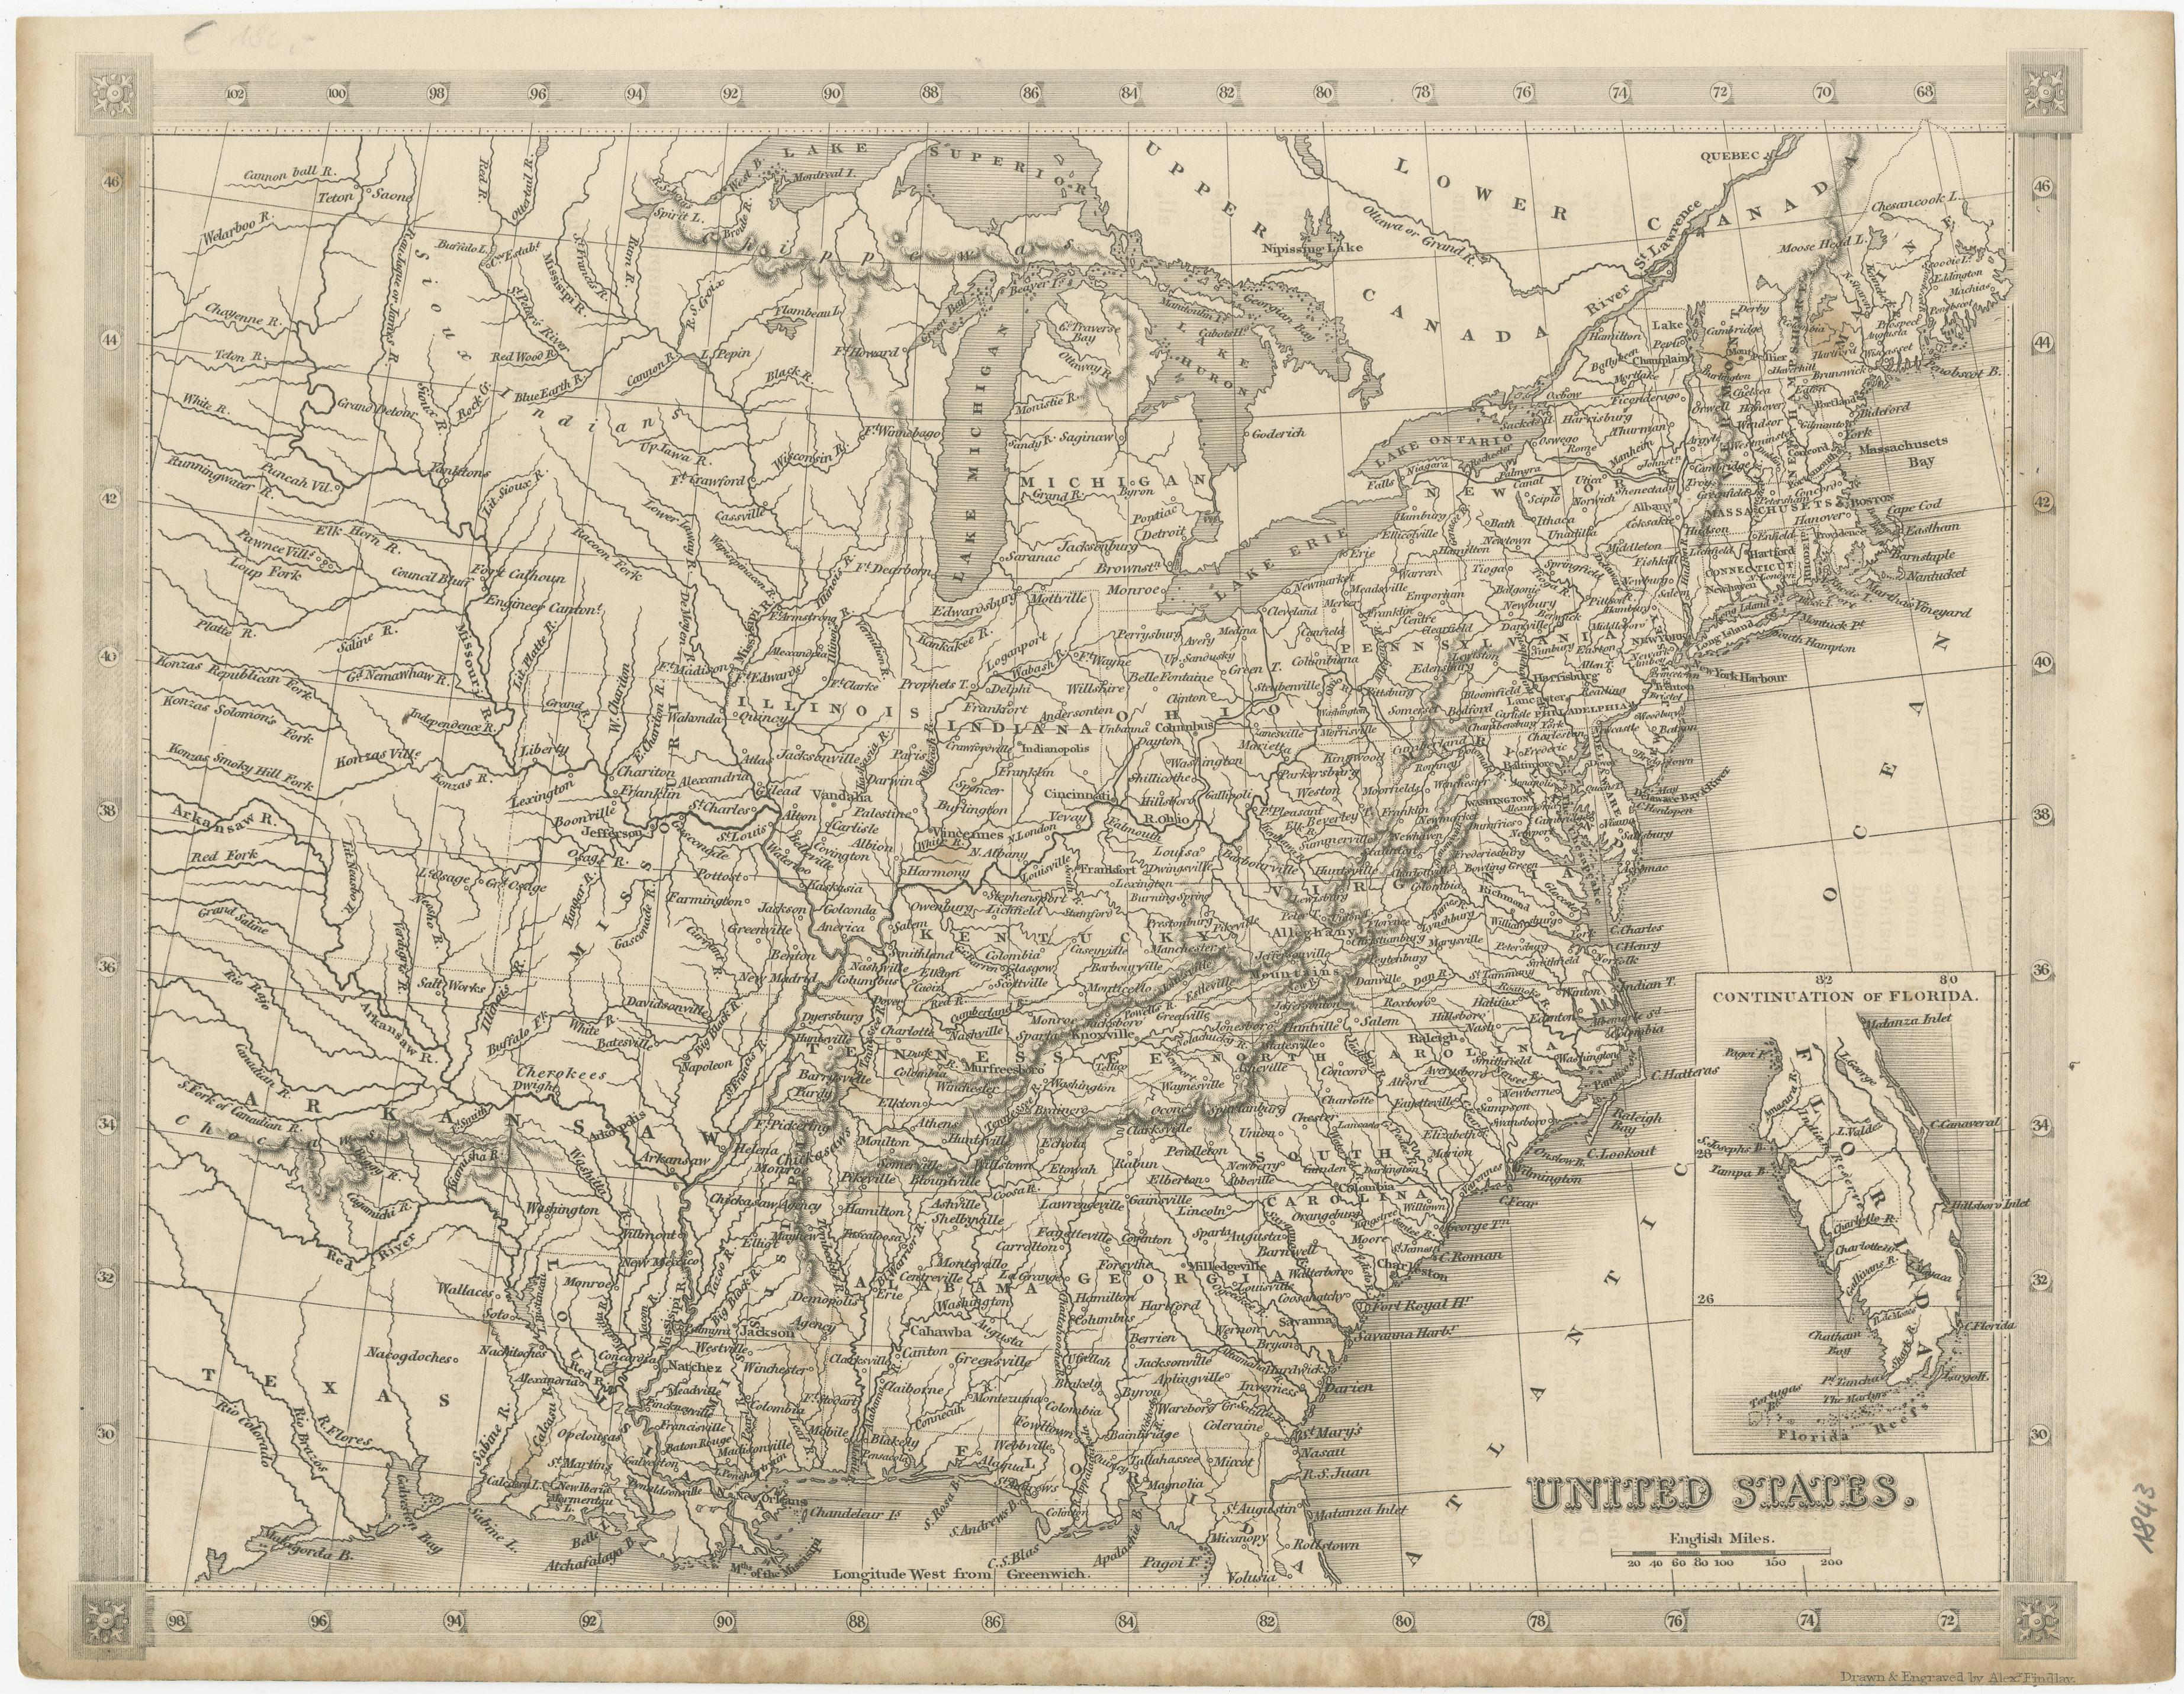 Antique map titled 'United States'. Steel engraved map of the United States. With small inset map of the continuation of Florida. Source unknown, to be determined. Published circa 1843.